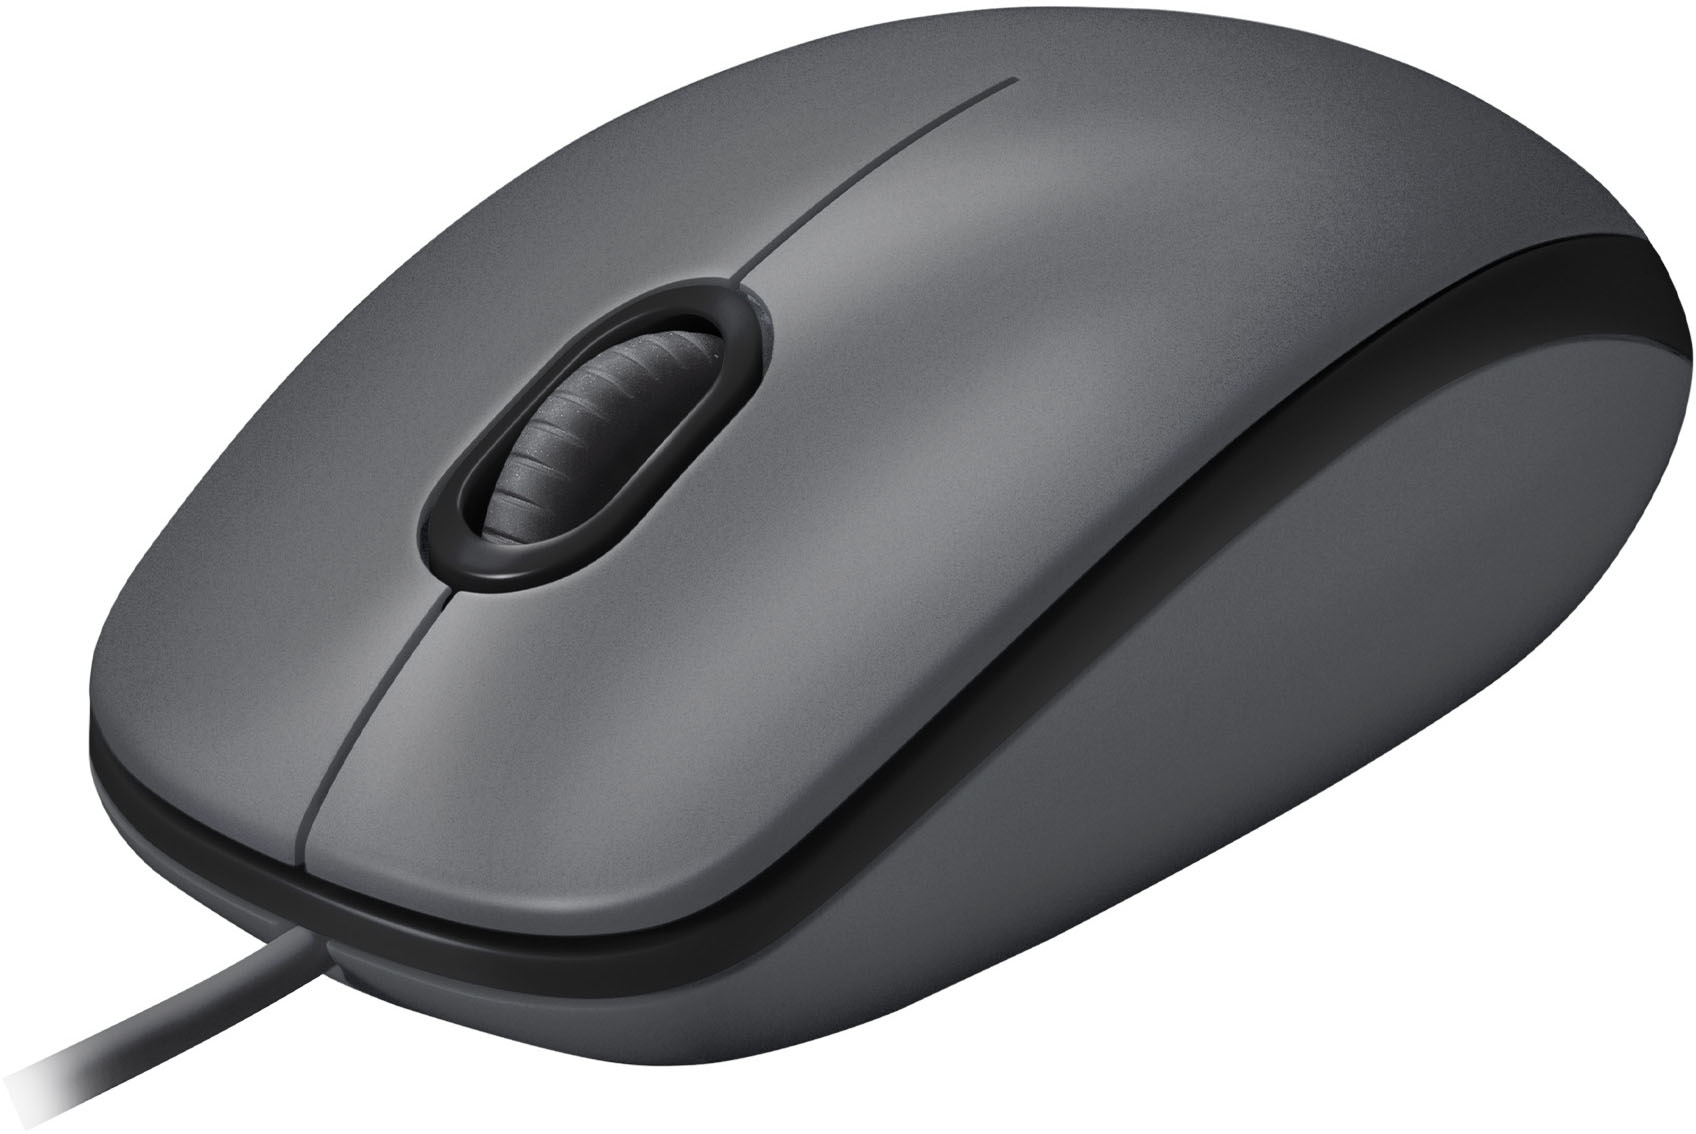 Logitech - M100 Wired Optical Ambidextrous Optical Mouse with 1000 DPI Optical Tracking - Gray